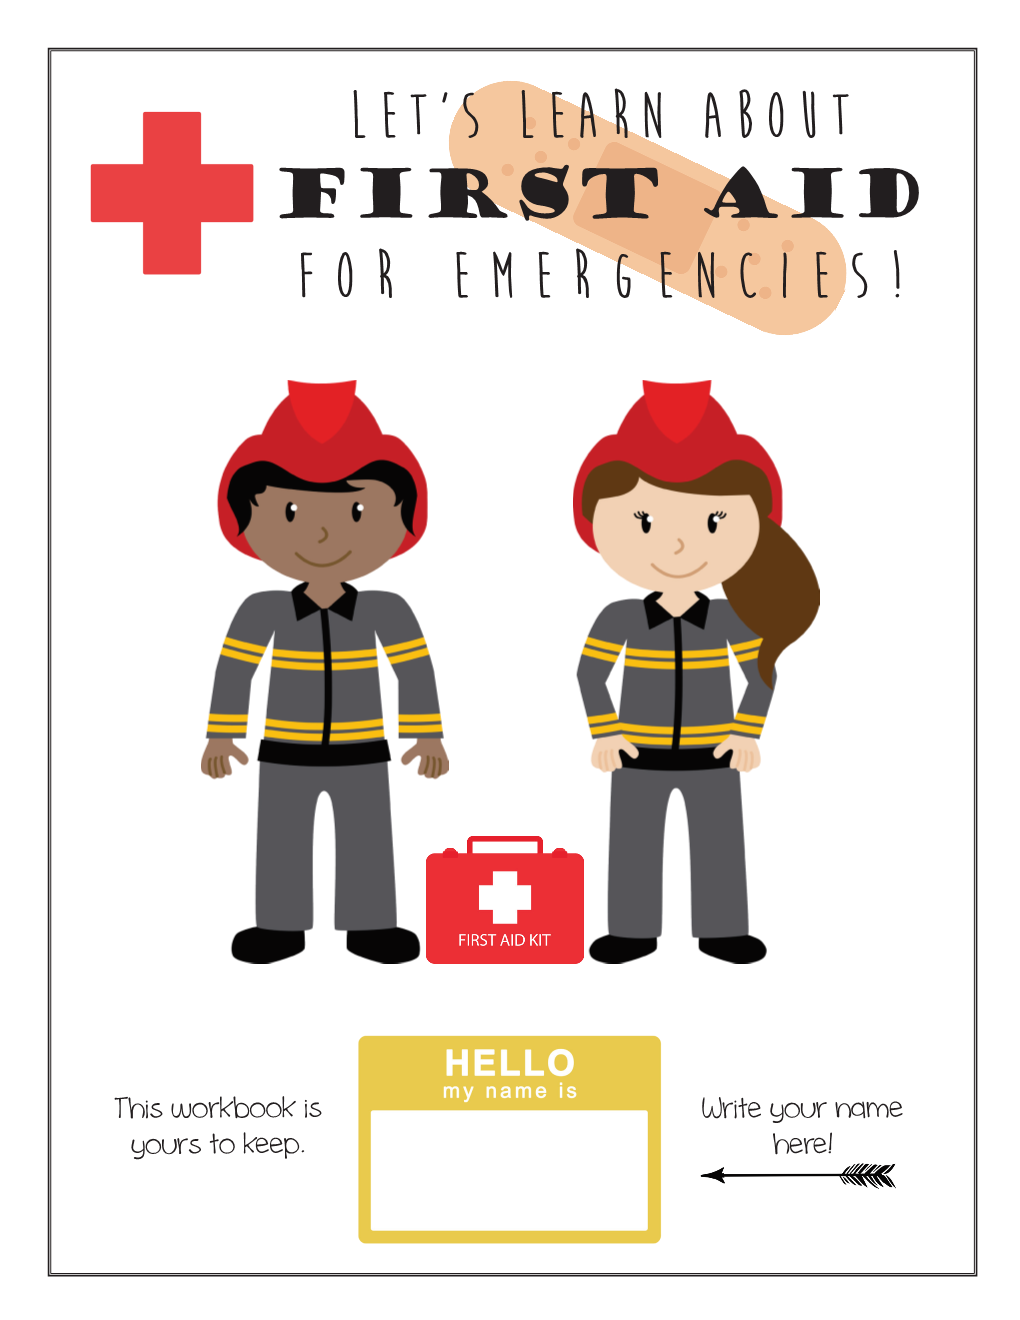 Let's Learn About First Aid for Emergencies!